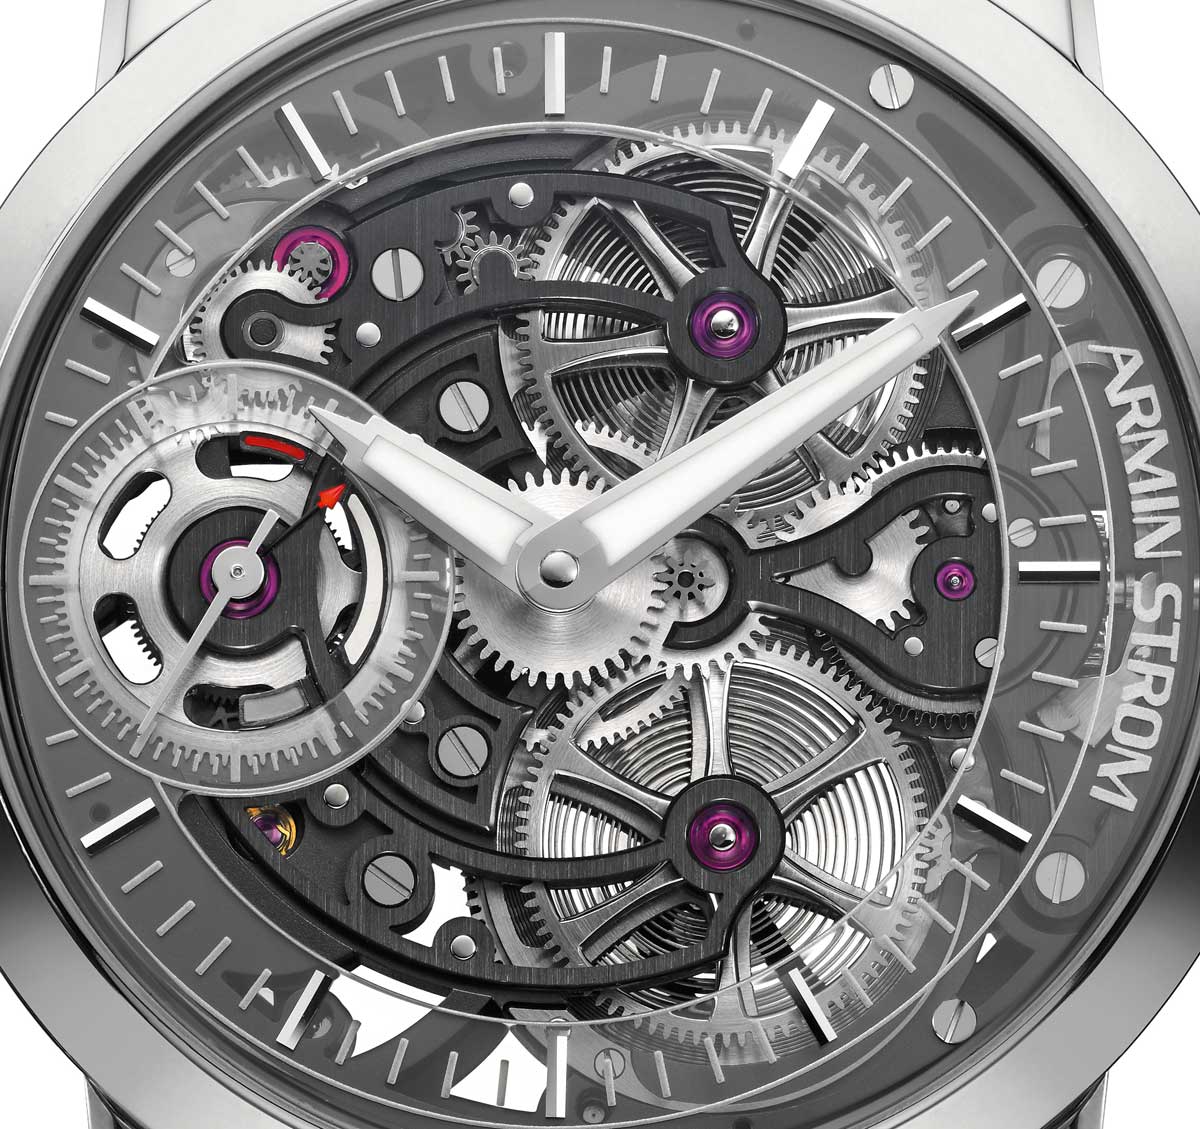 Armin Strom Skeleton Pure Only Watch 2015